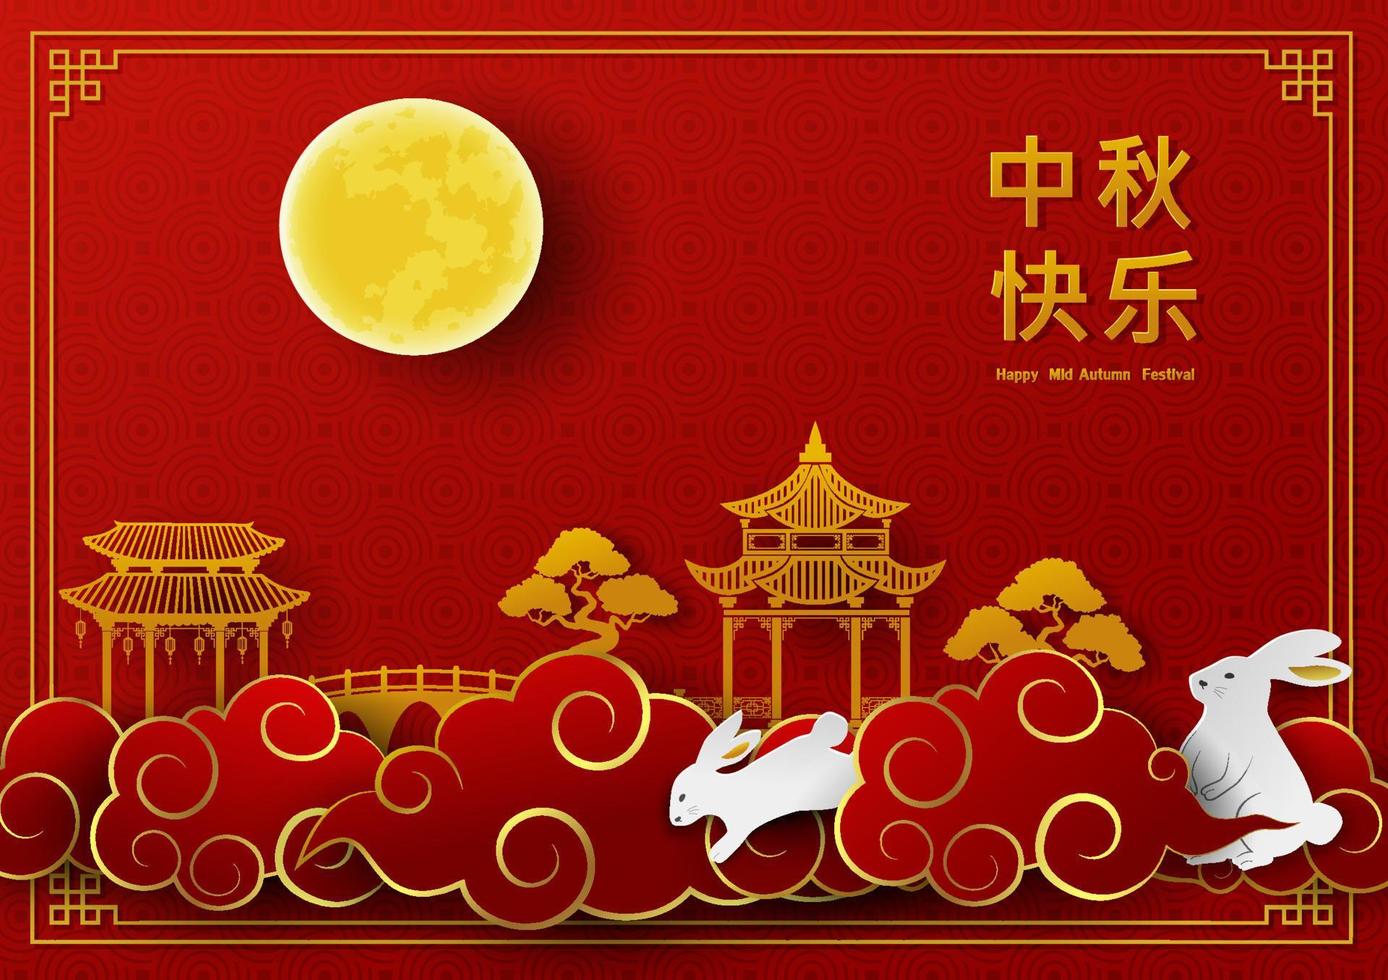 Mid Autumn Festival or Moon Festival,gold paper cut style with full moon,rabbits,cloud,pavilion and bridge on red background,Chinese translate mean Mid Autumn Festival vector